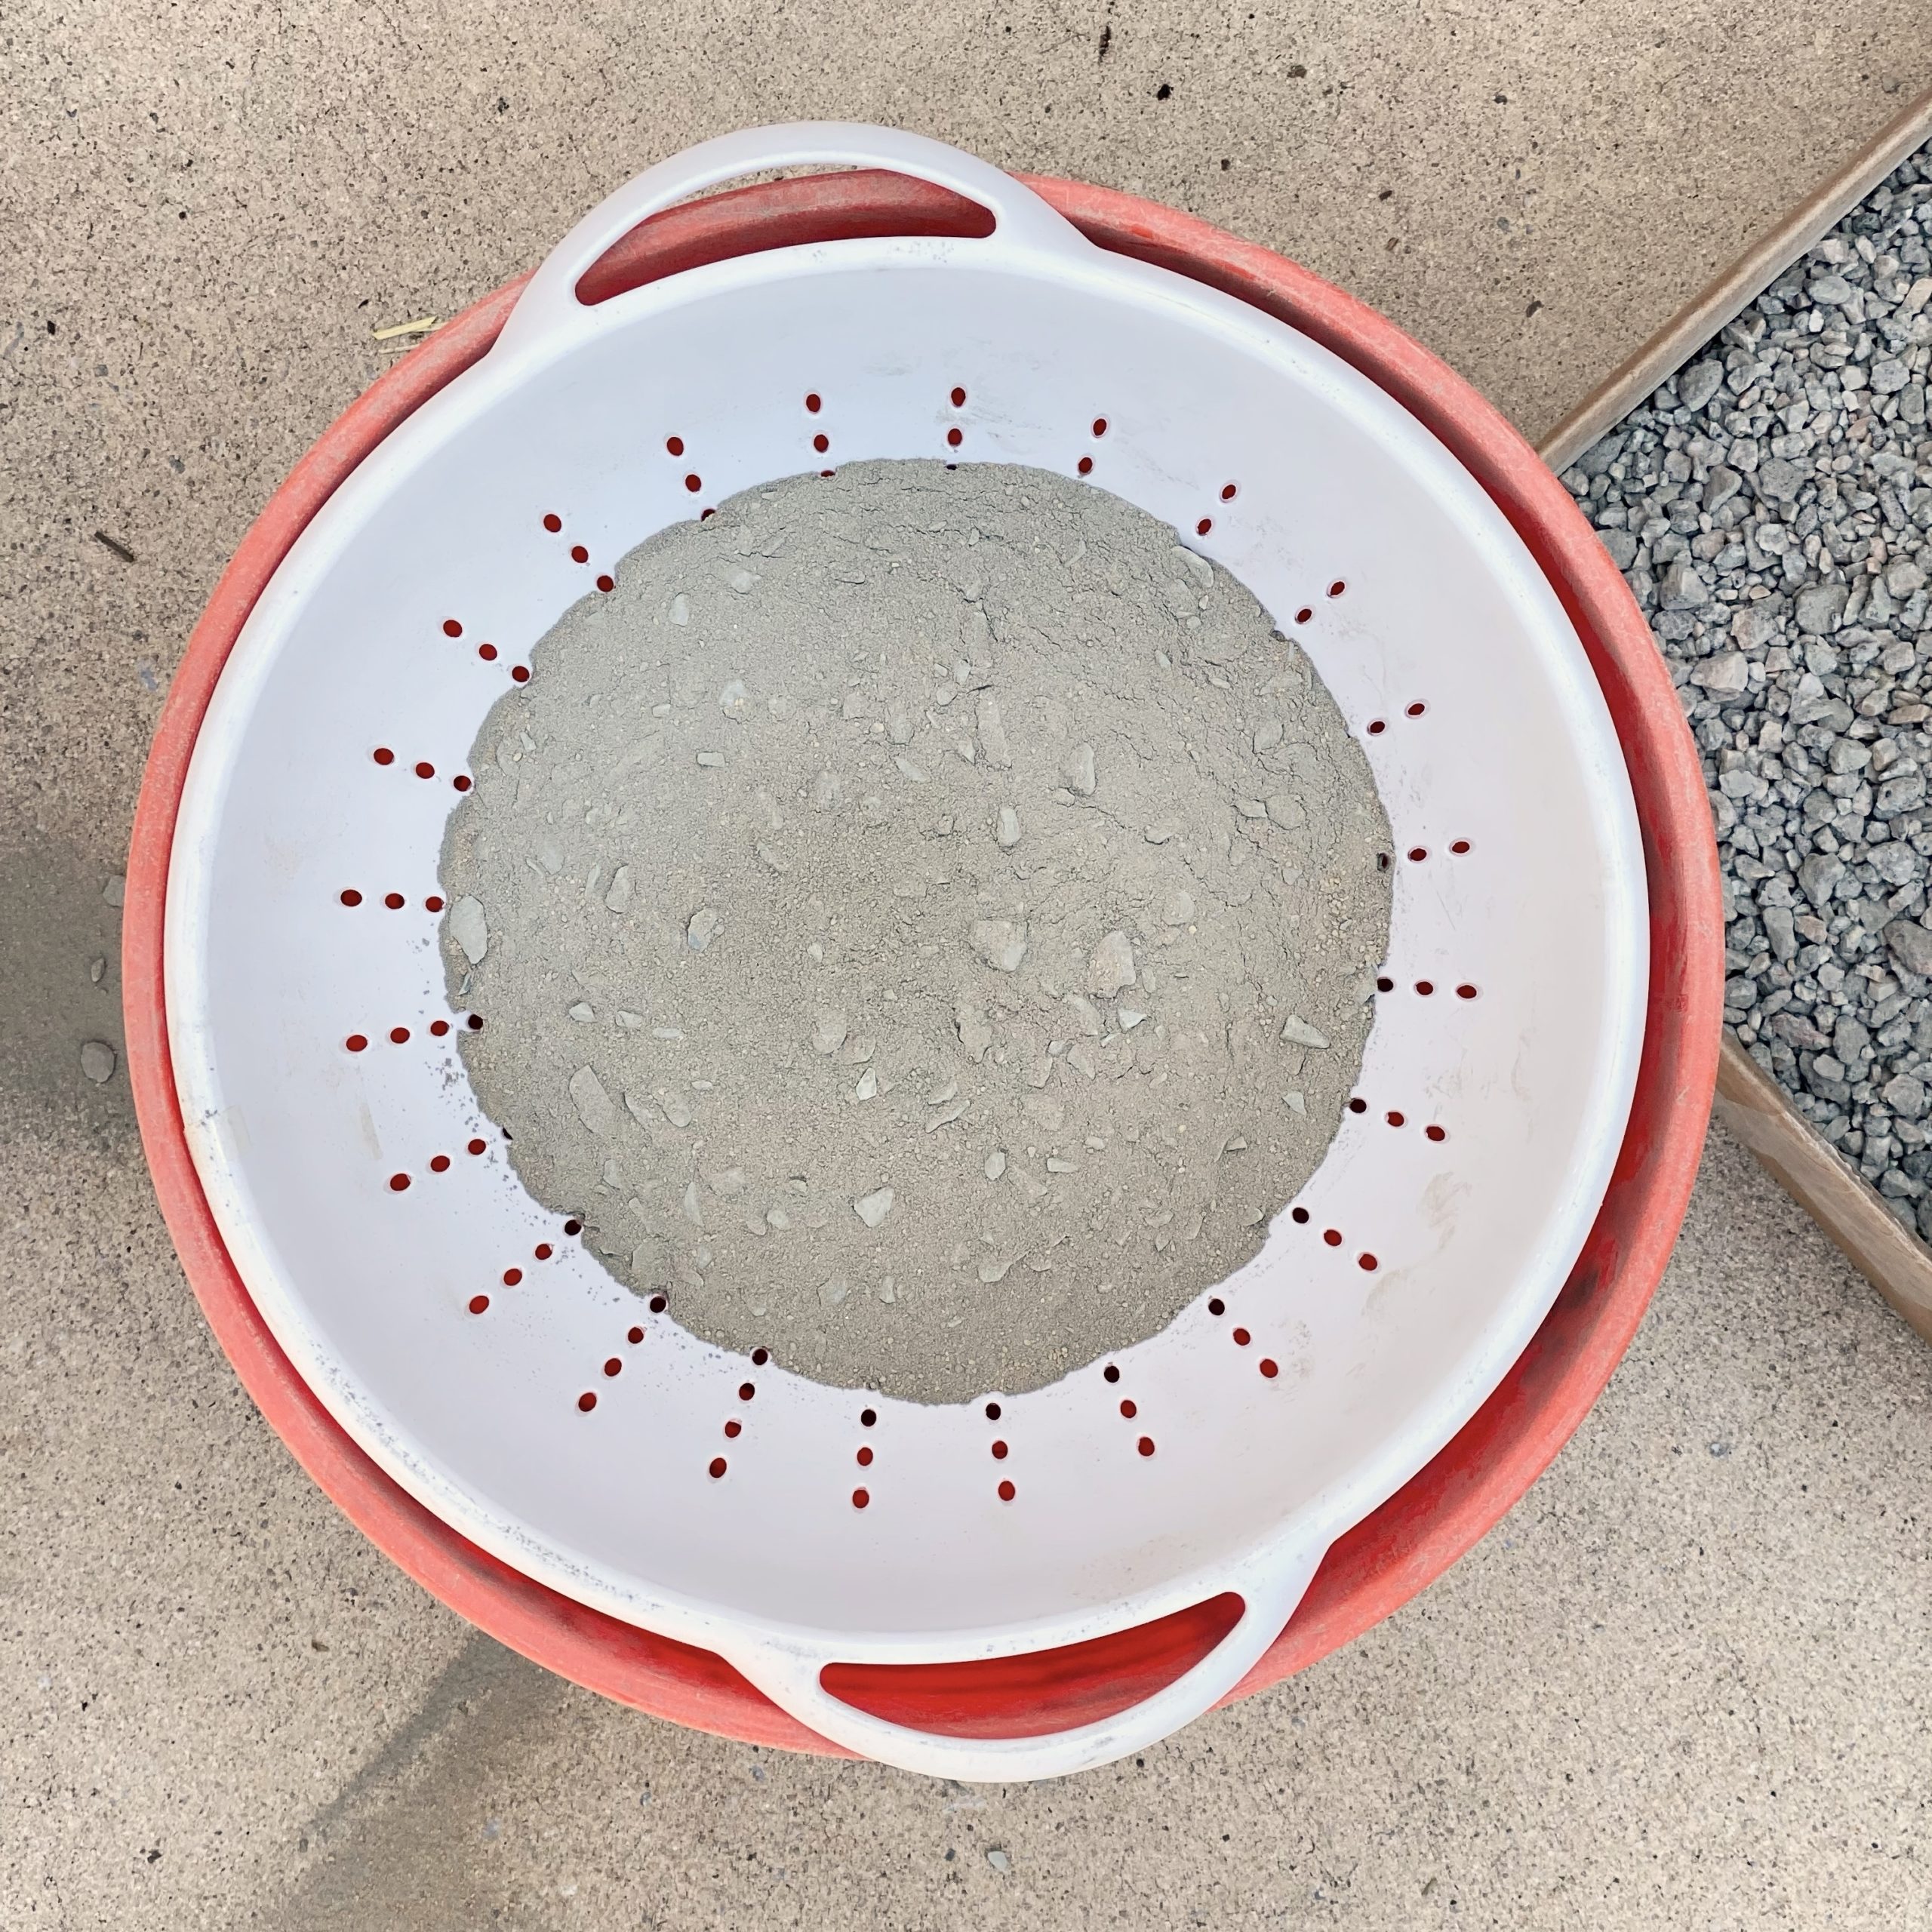 Rocks being sifted out of concrete in colander.